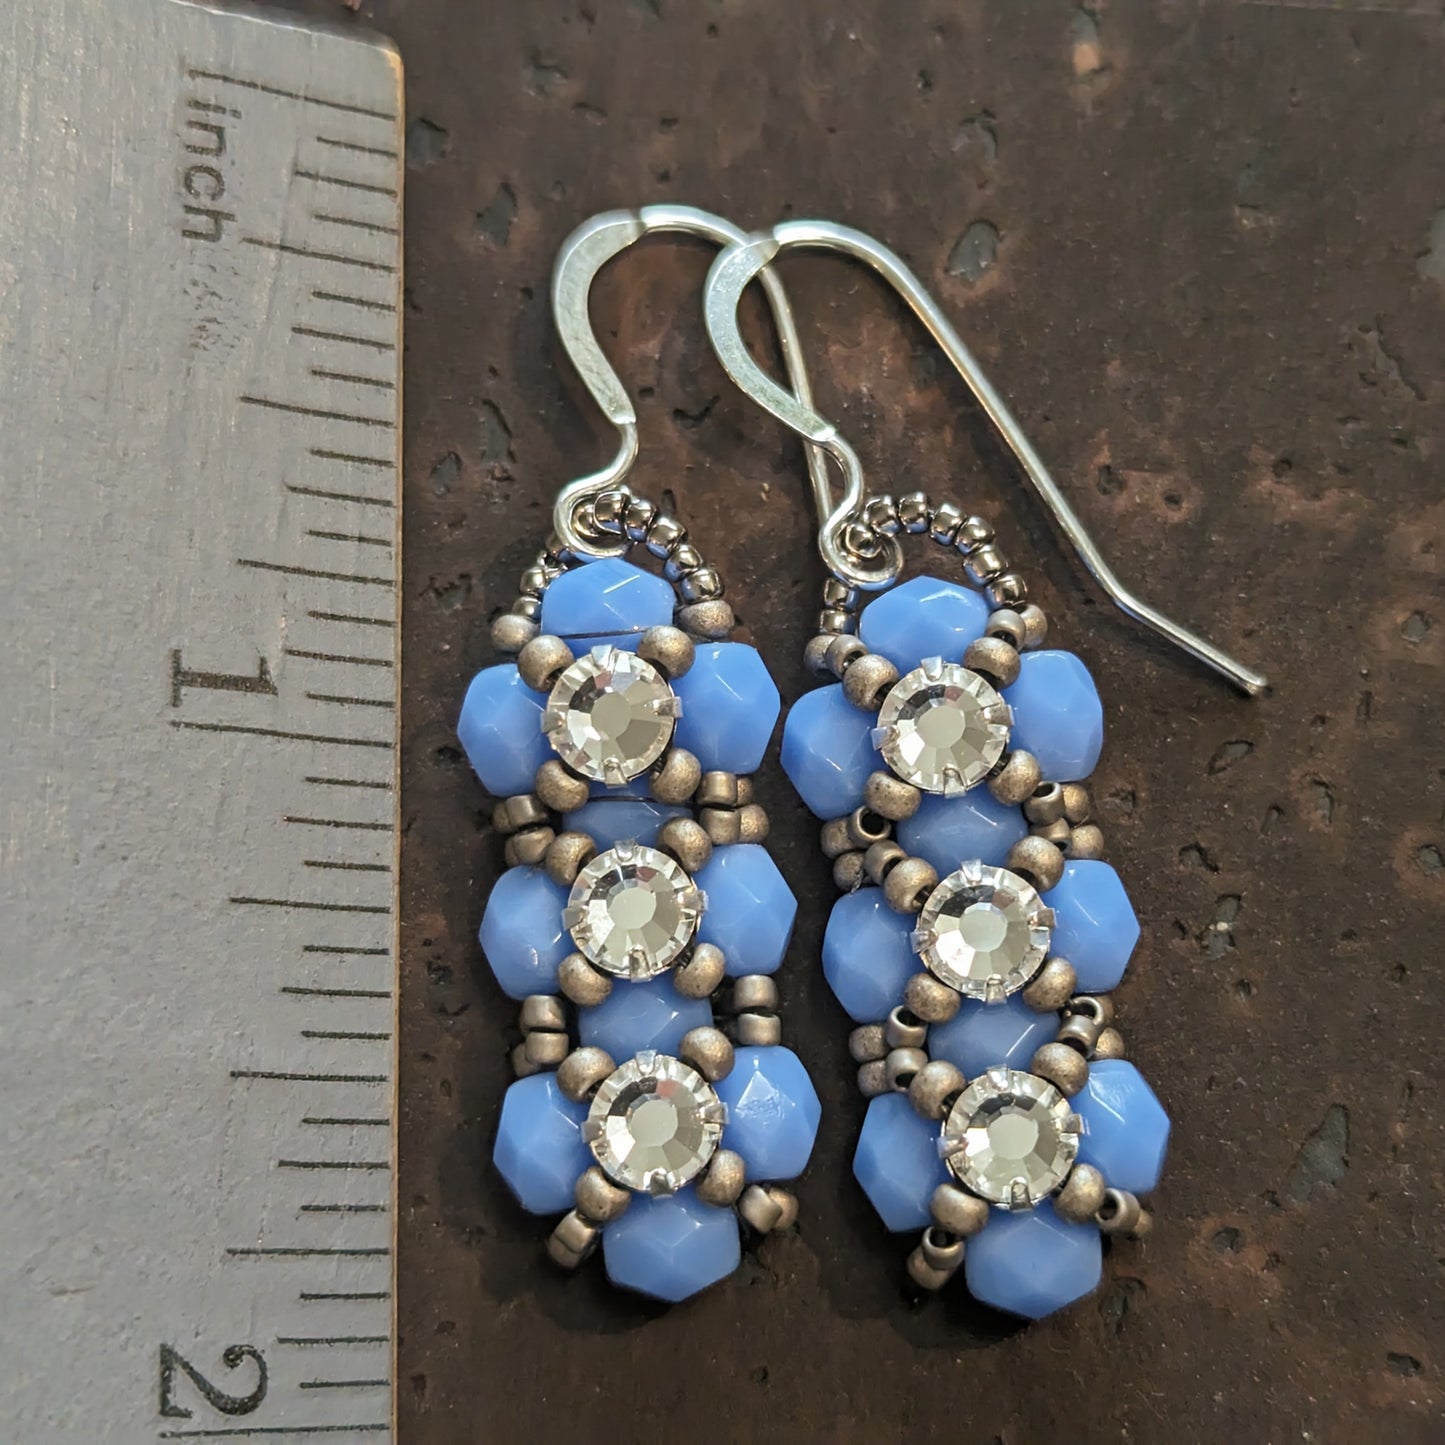 Silver and opaque pale periwinkle blue earrings on a cork-like dark brown background next to a ruler. The earrings have a background of light periwinkle blue and there are matte silver seed beads in x-shape securing three clear rhinestones in a vertical row. The earrings have silver ear wires.